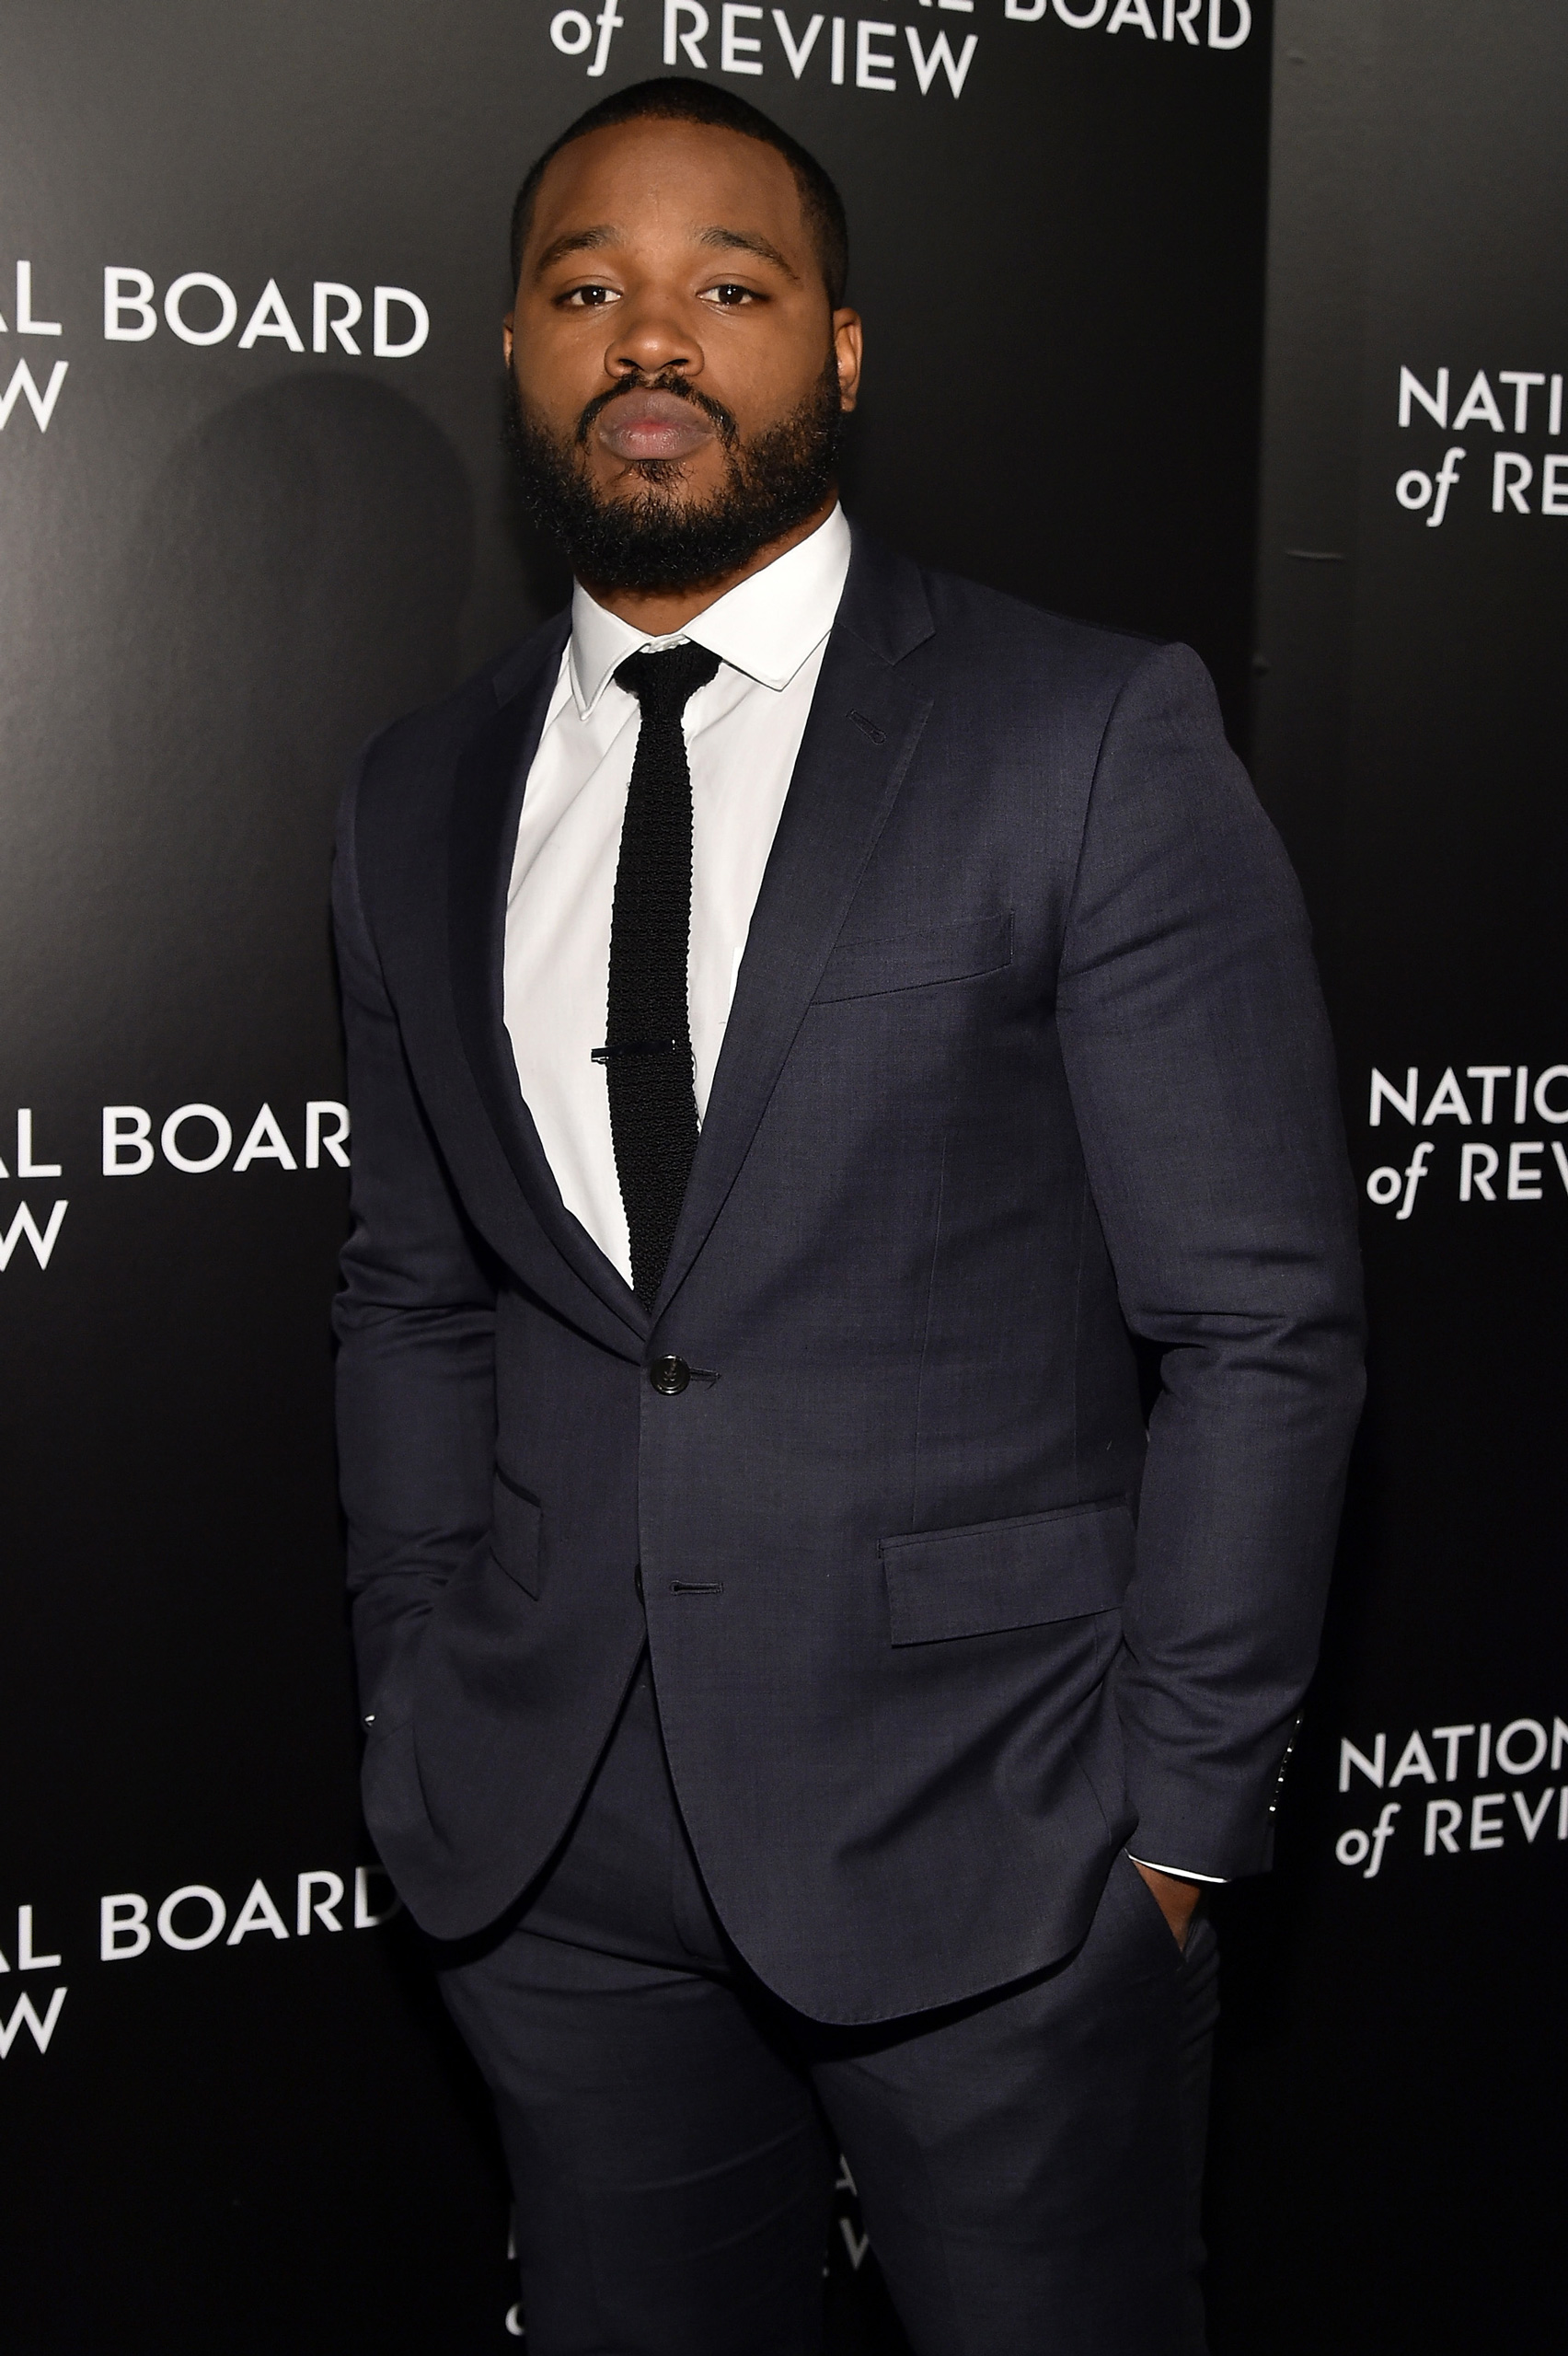 NEW YORK, NY - JANUARY 05:  Director Ryan Coogler attends 2015 National Board of Review Gala at Cipriani 42nd Street on January 5, 2016 in New York City.  (Photo by Mike Coppola/FilmMagic)